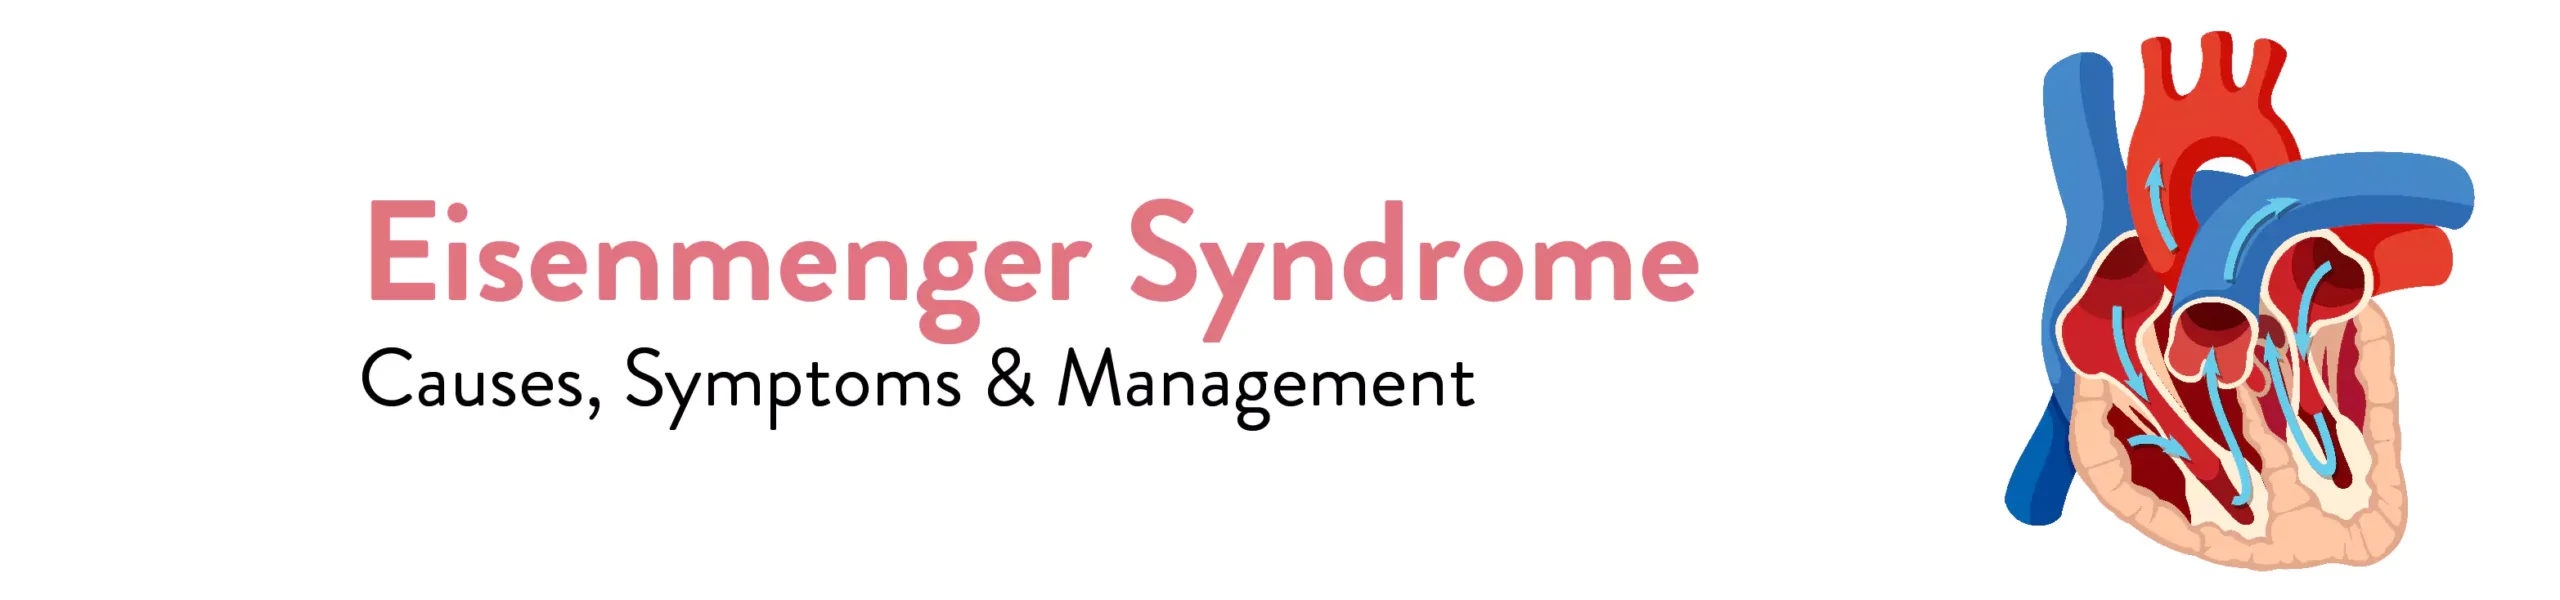 Eisenmenger syndrome causes symptoms and treatment